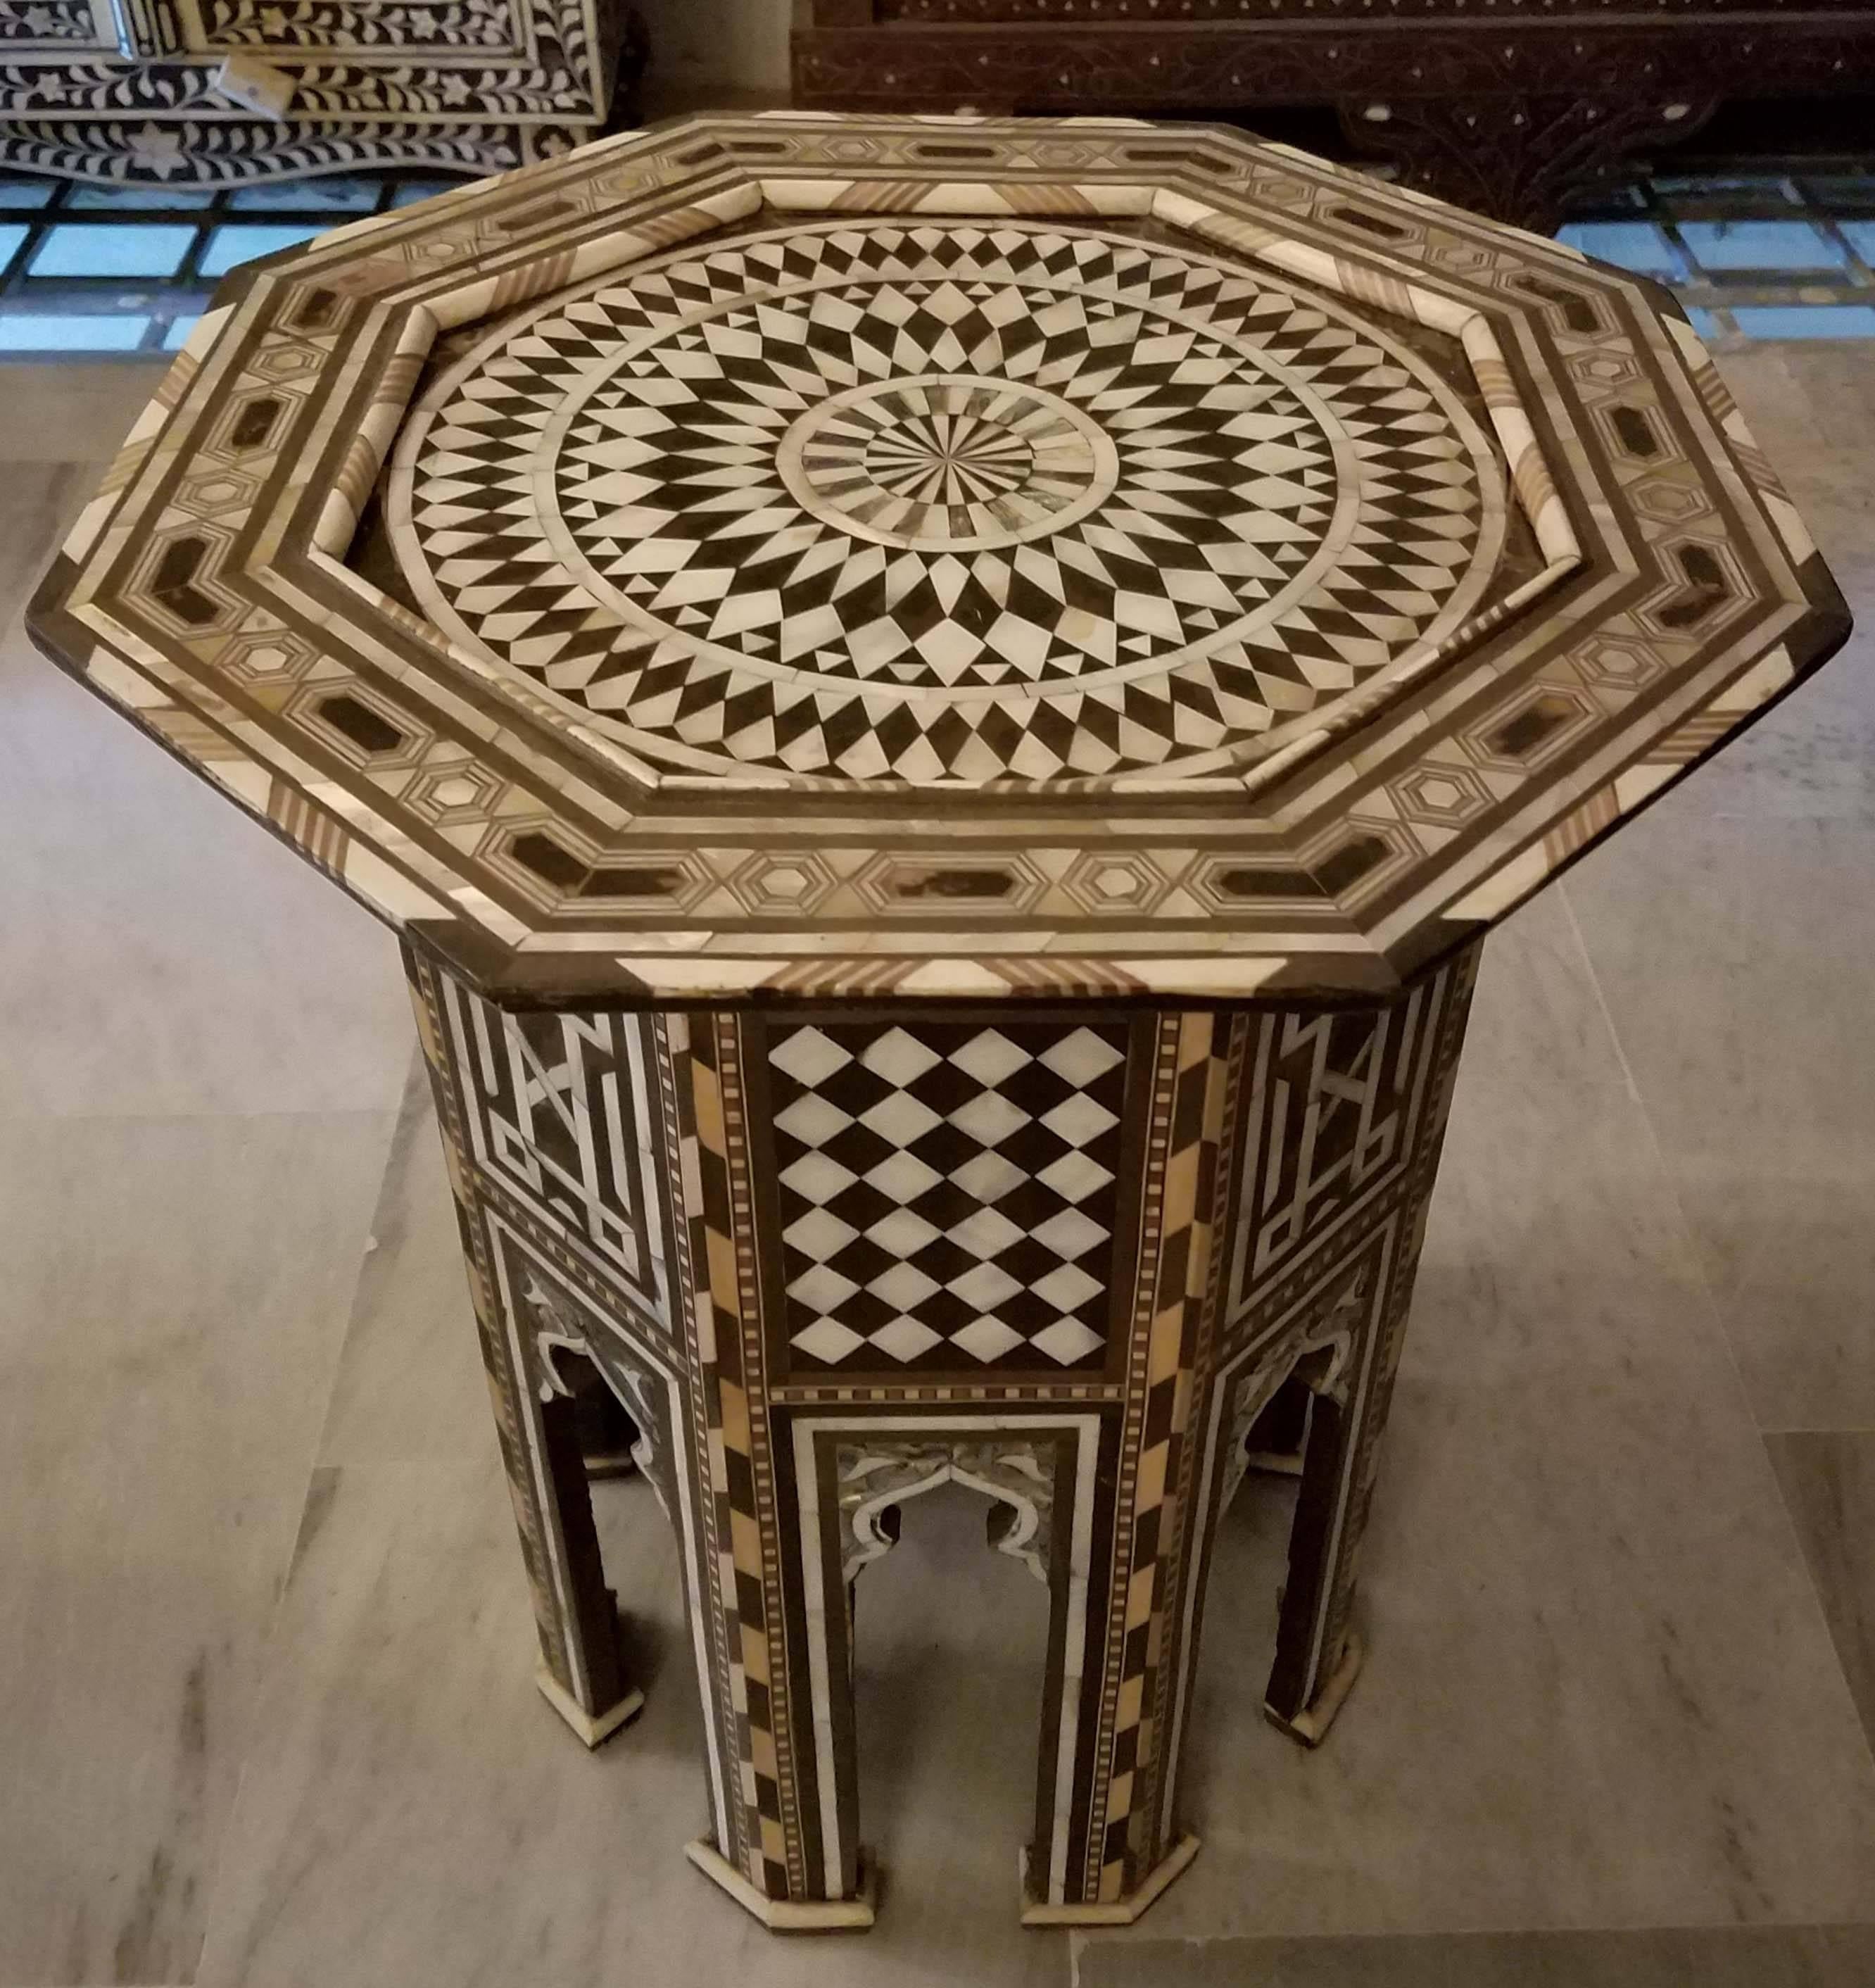 Syrian style mother-of-pearl side and rare shells made in Morocco by a fine Syrian artisan. Beautiful Inlay throughout thru amazing handcraftsmanship. Definitely a conversation piece. Must see to really appreciate.
Dimensions: Approximately 21